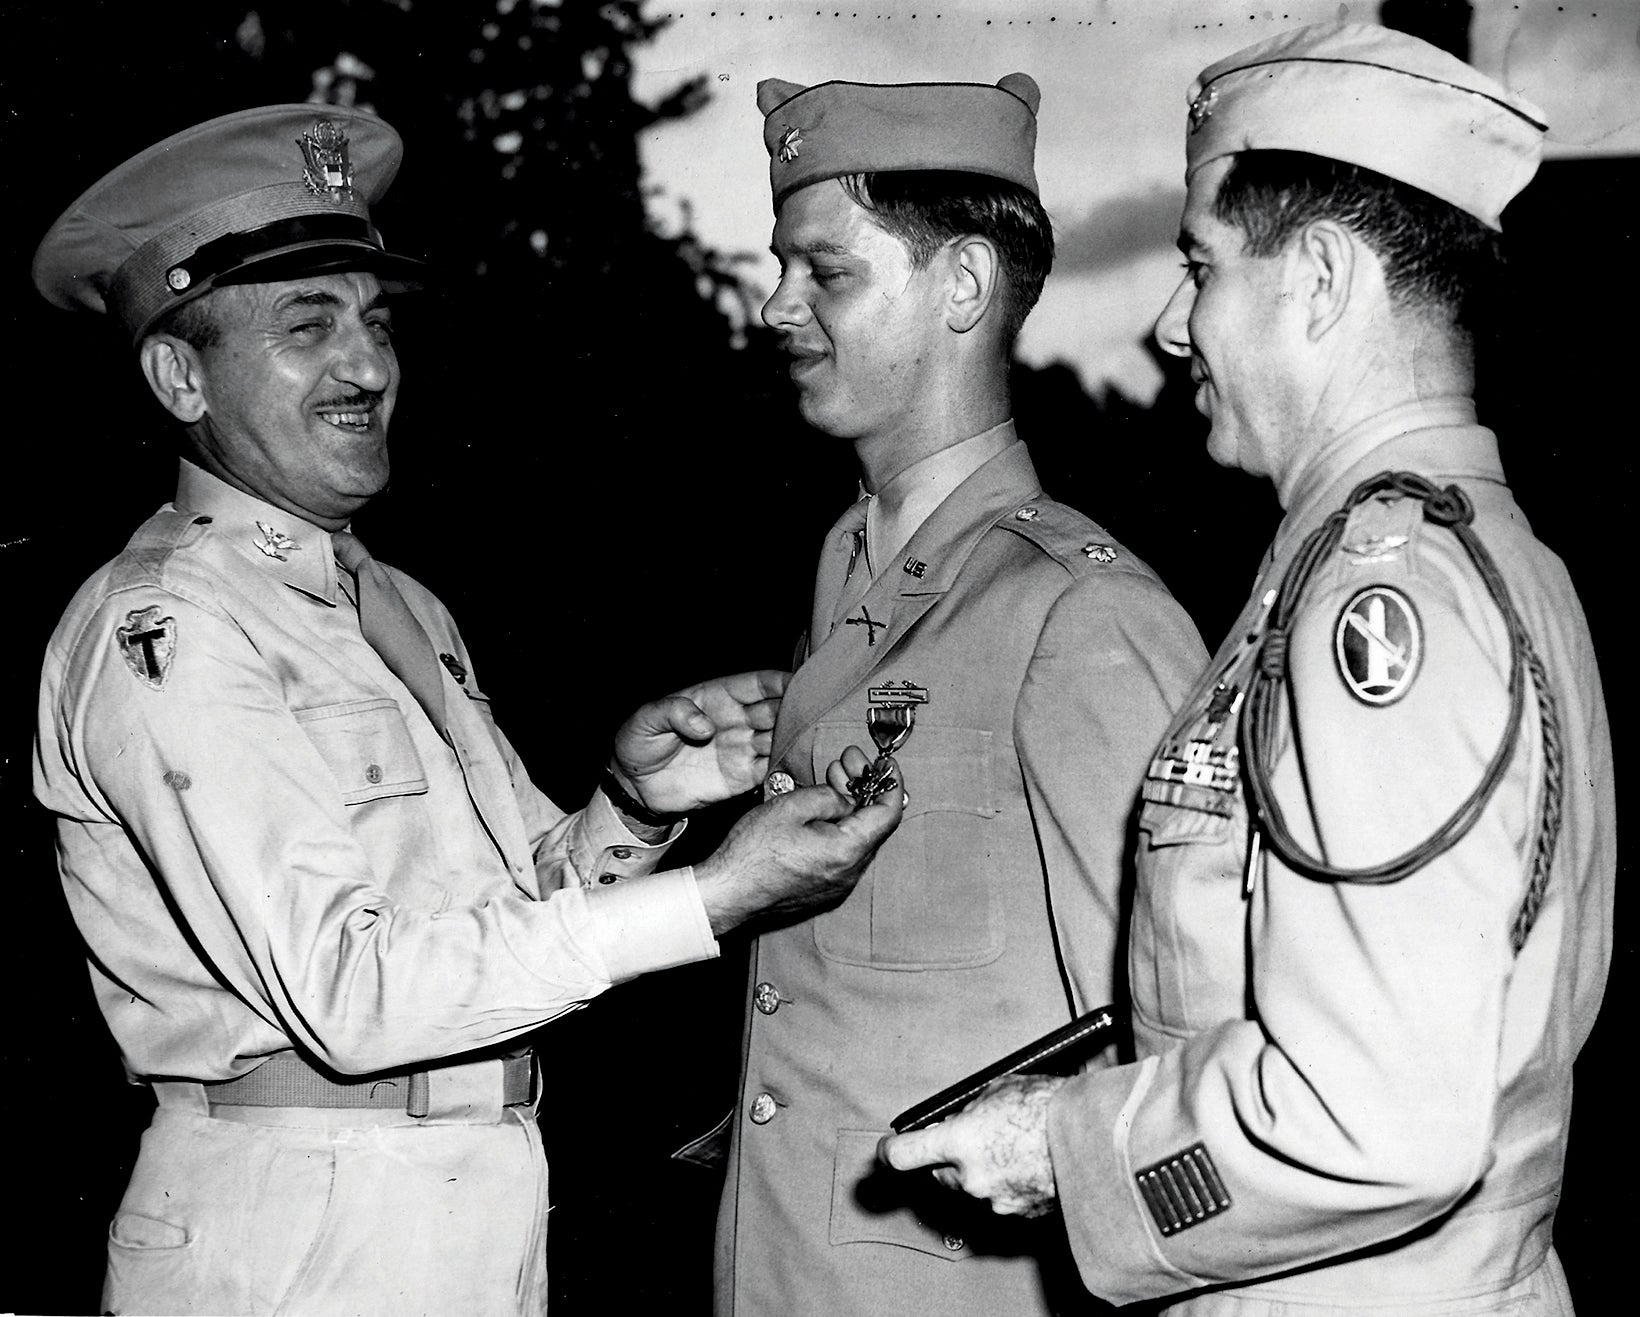 A 22-year-old Maj. Larimore receives the Distinguished Service Cross from Col. John Albright, post commander at Fort Myer, Virginia. (Credit: courtesy of Walt Larimore)